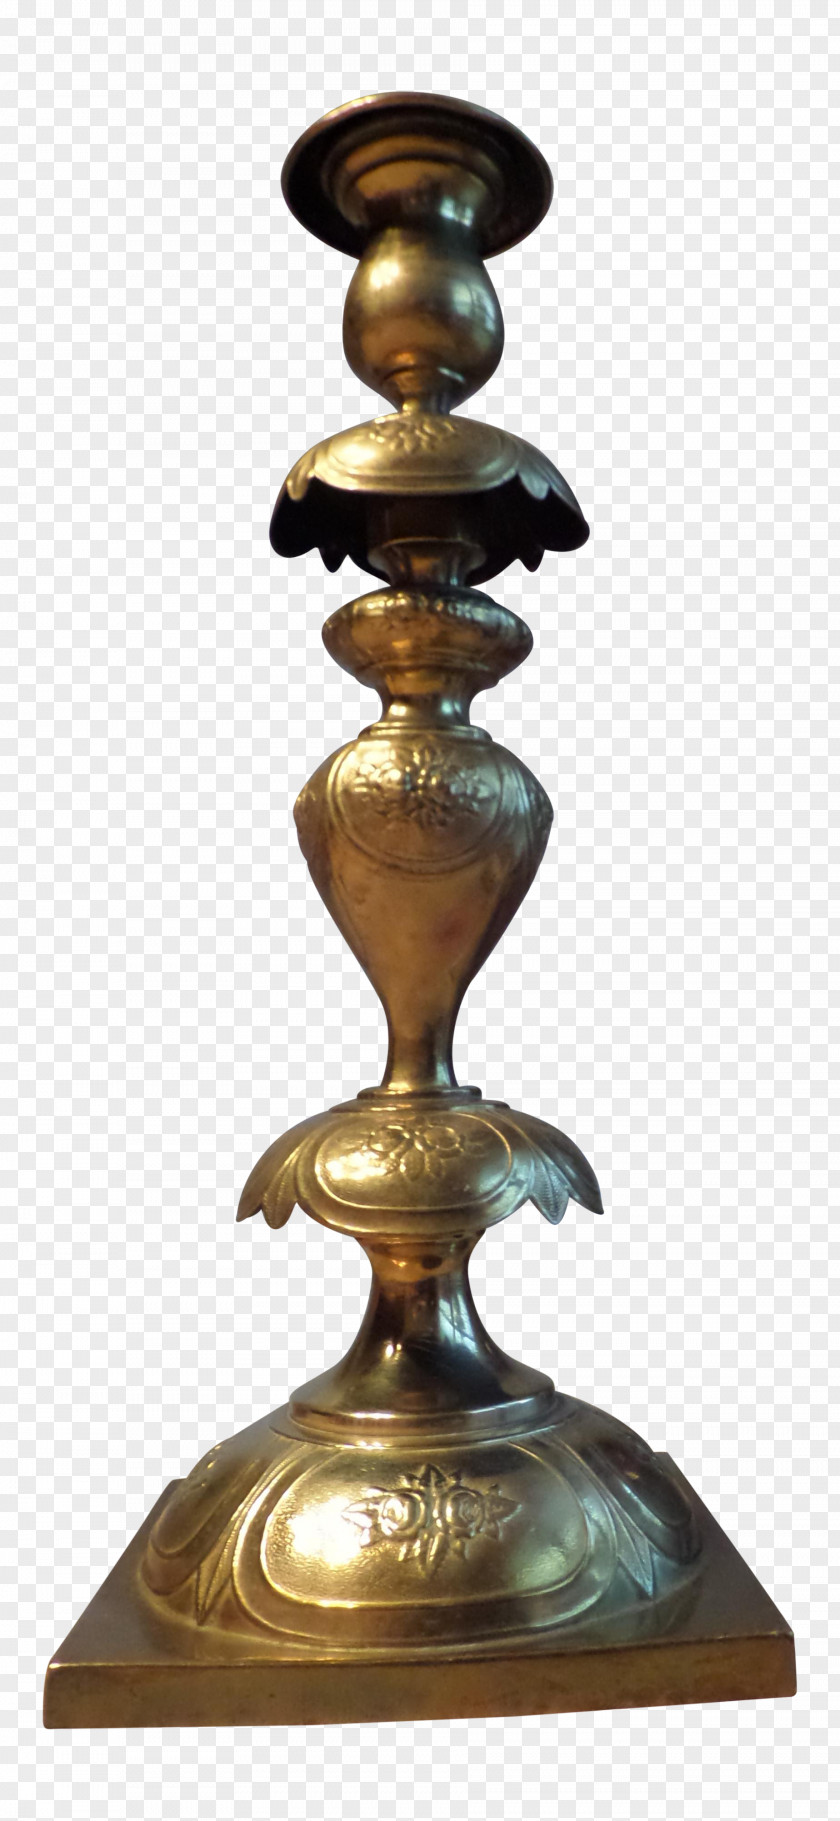 Baluster Chairish Antique Brass Candlestick Vintage Clothing PNG